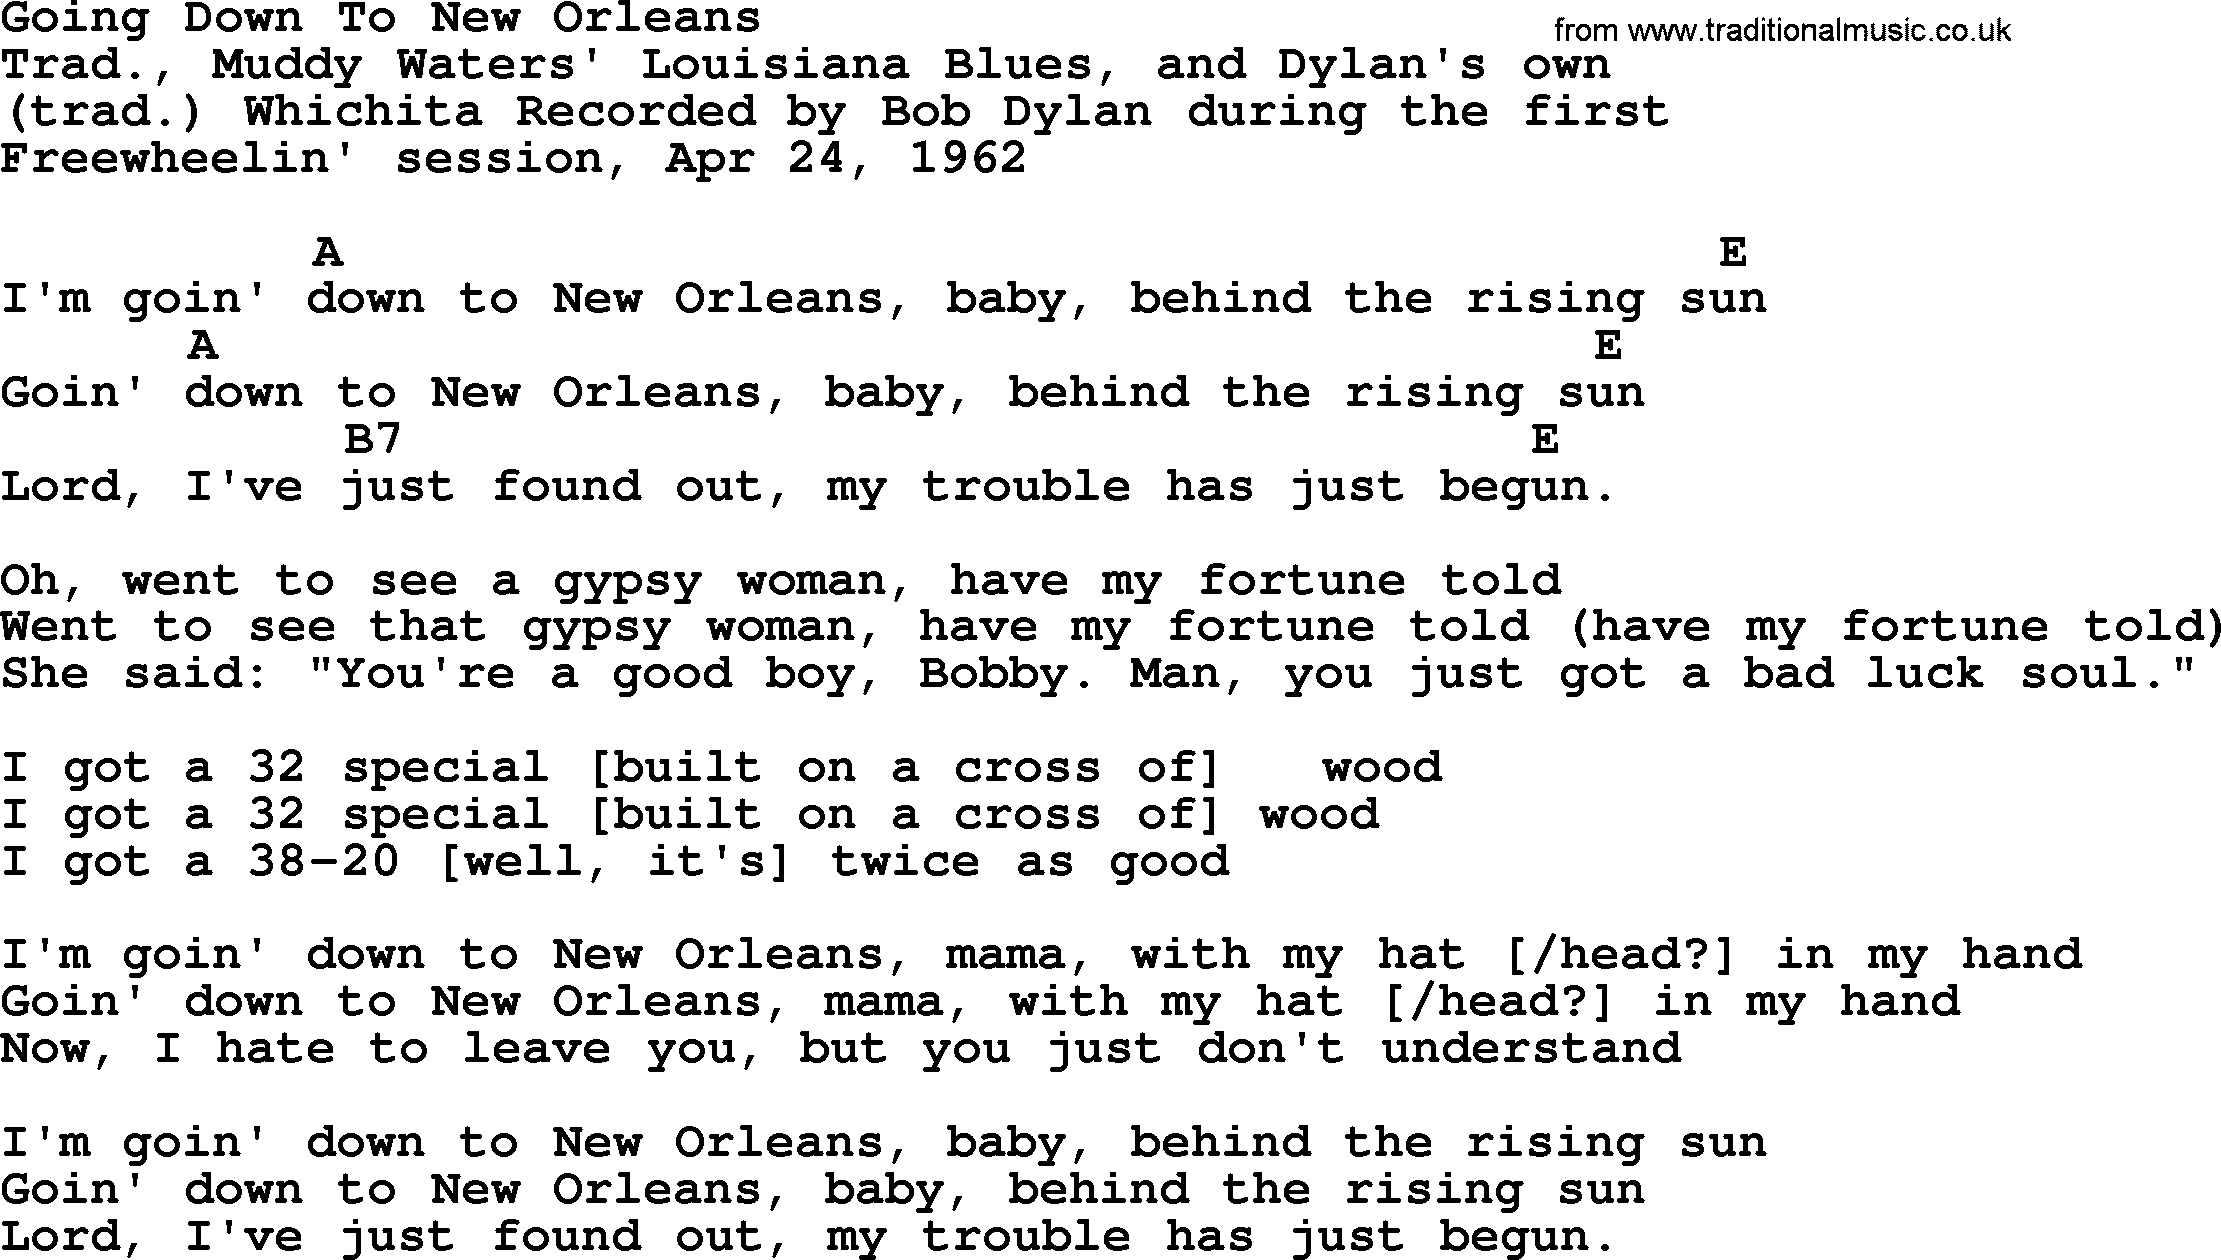 Bob Dylan song, lyrics with chords - Going Down To New Orleans